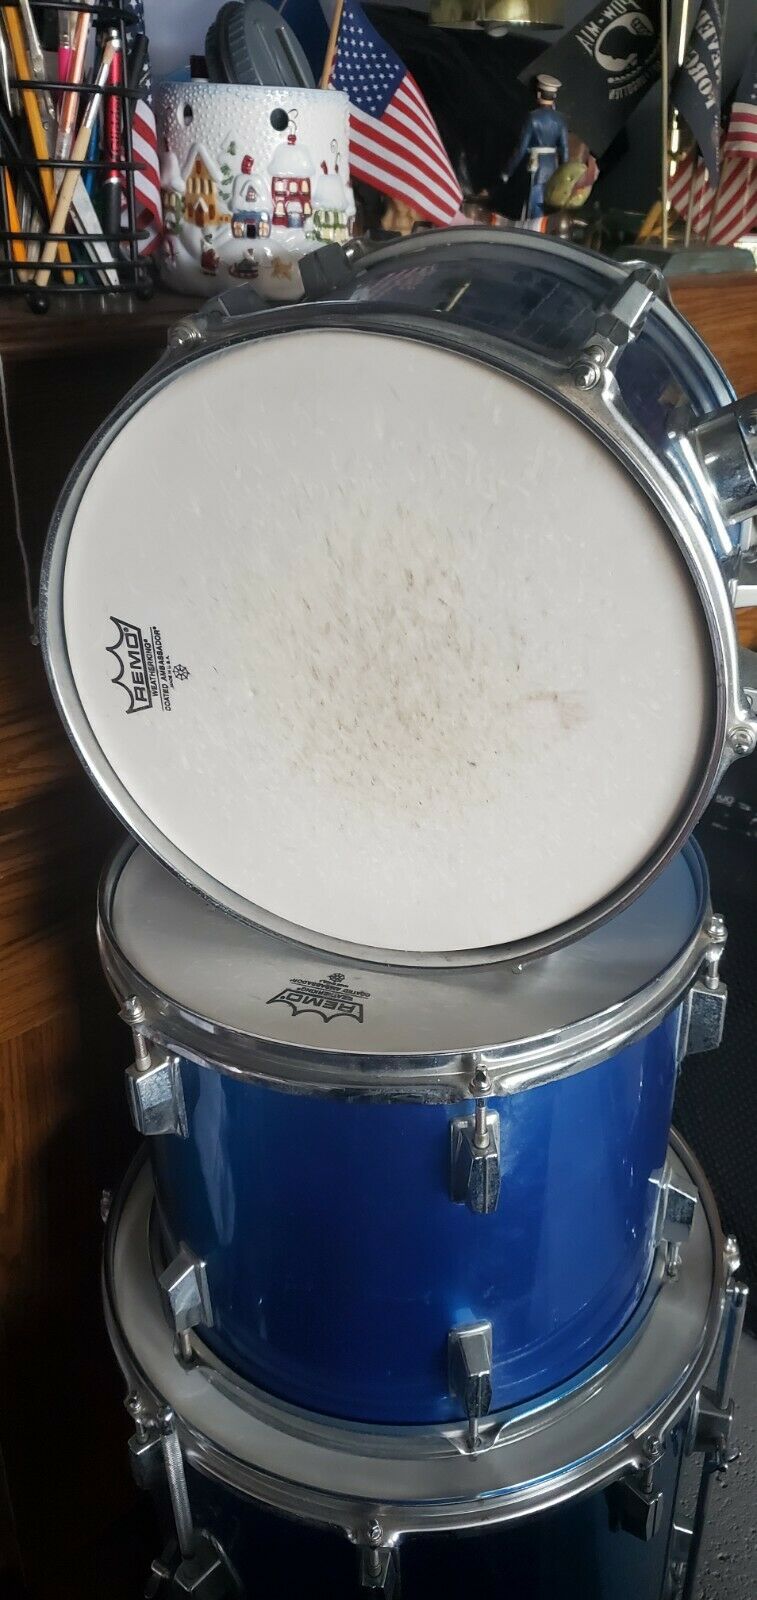 12 Inch Tom Drum, Good White Coated Heads, Not Sure Of Brand